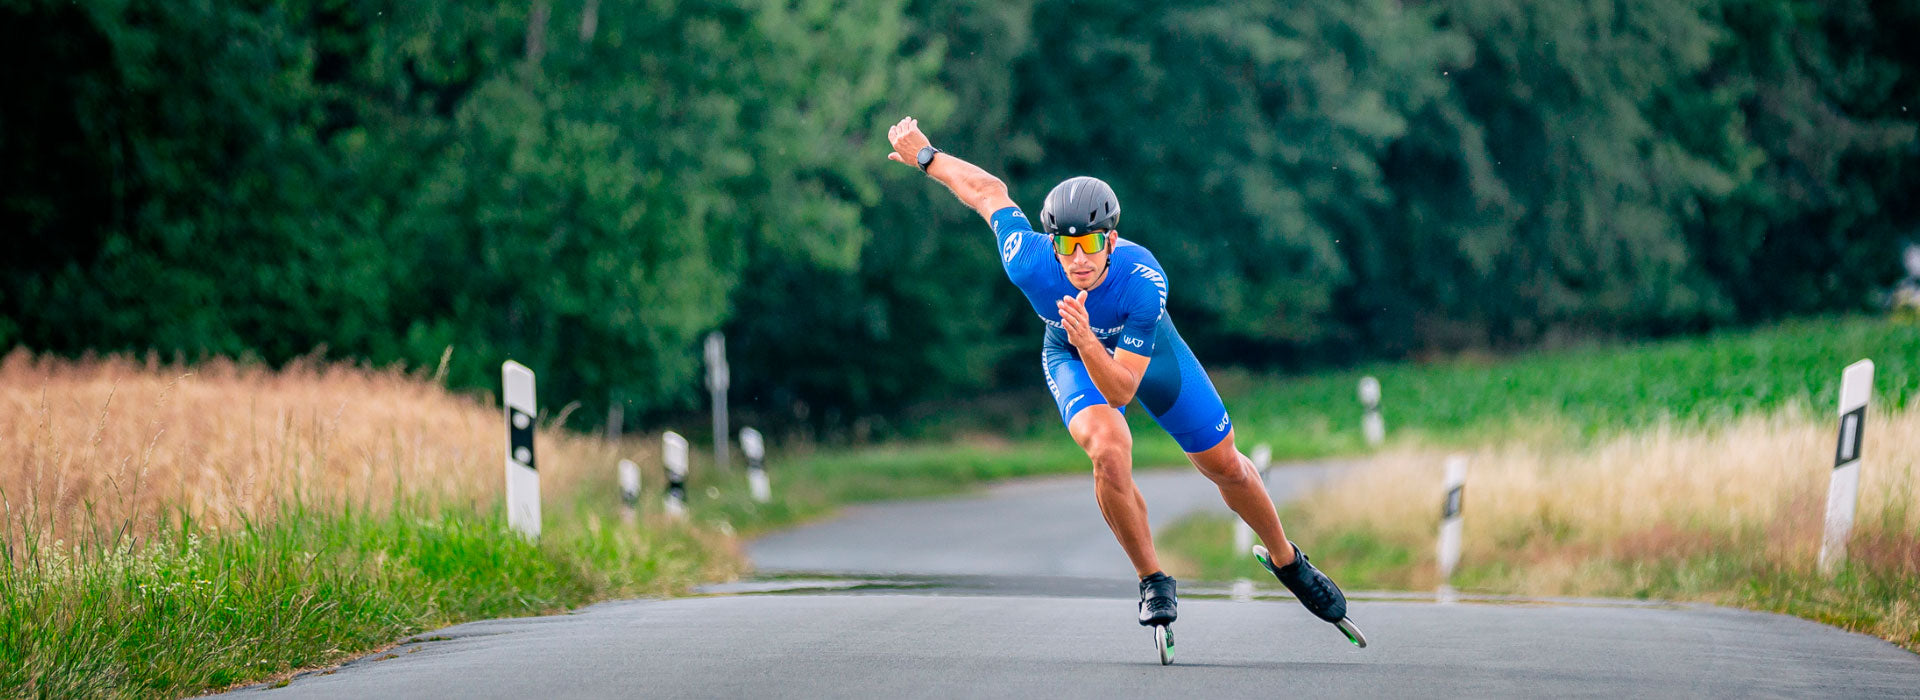 An inline speed skater with a black helmet and sunglasses wearing Powerslide inline race skates mid-stride skating down a road